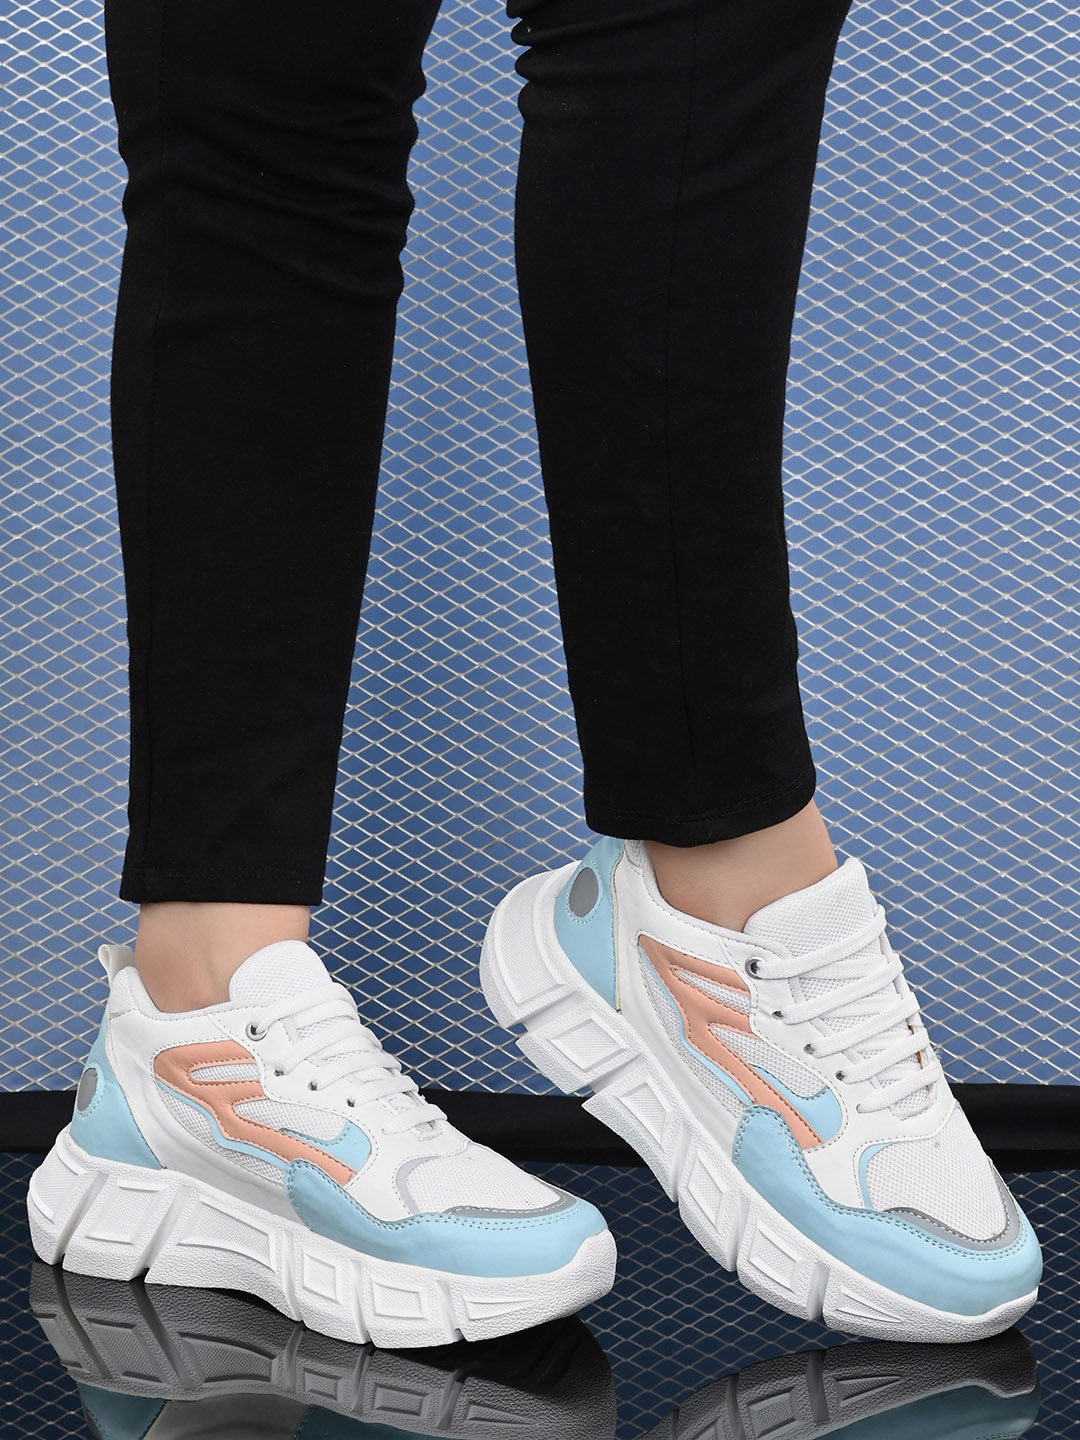 AfroJack Women Blue Colourblocked Sneakers Price in India